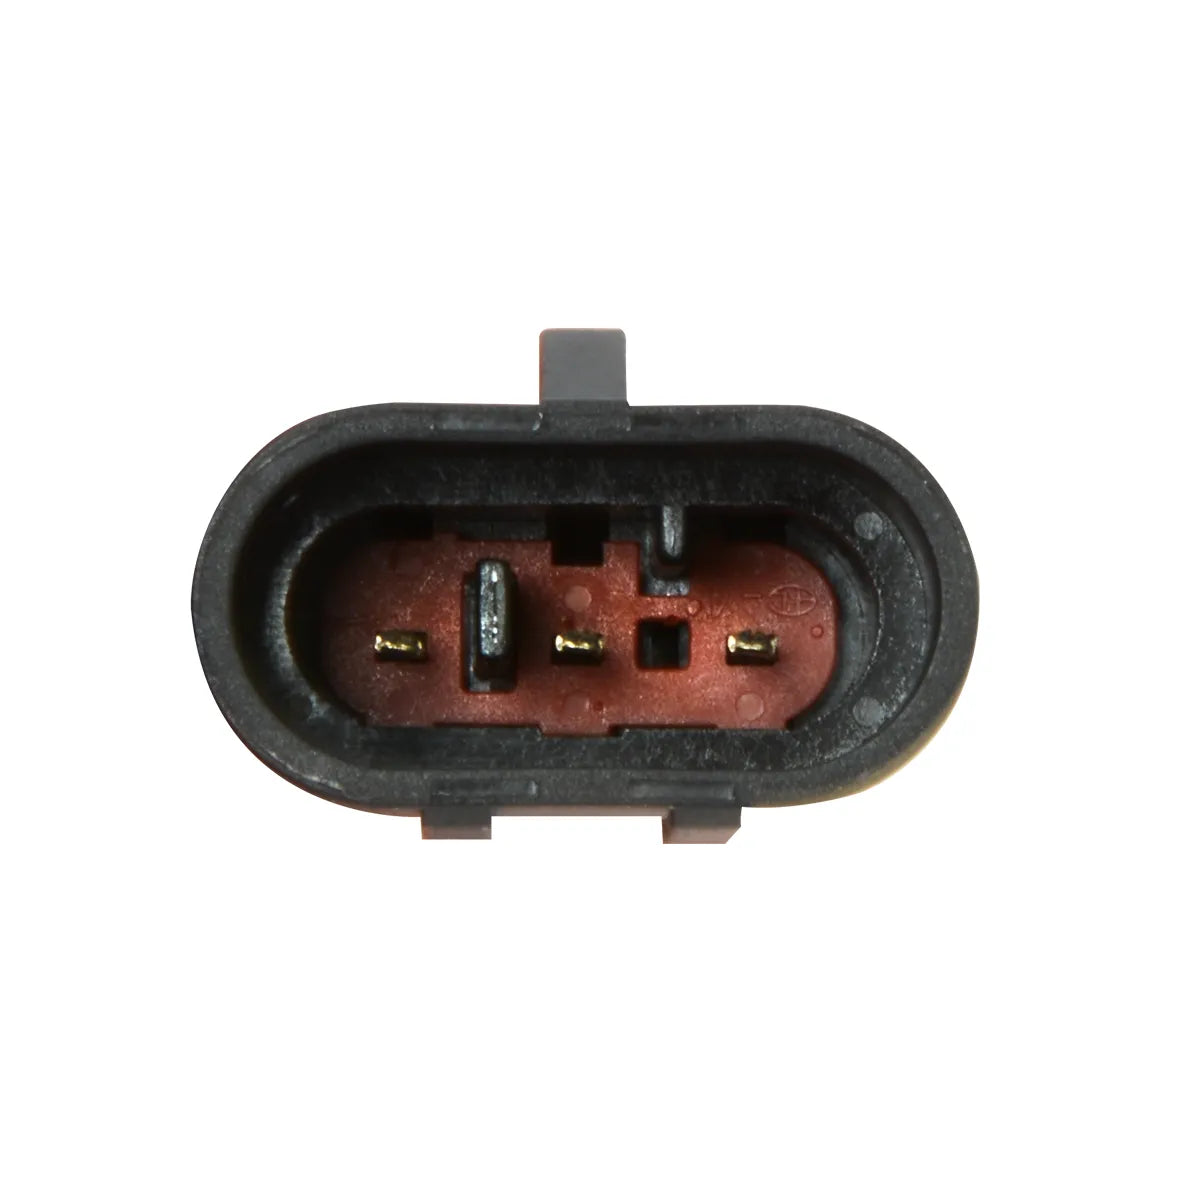 WEATHER PACK 3-PIN LIGHT ADAPTER PLUG